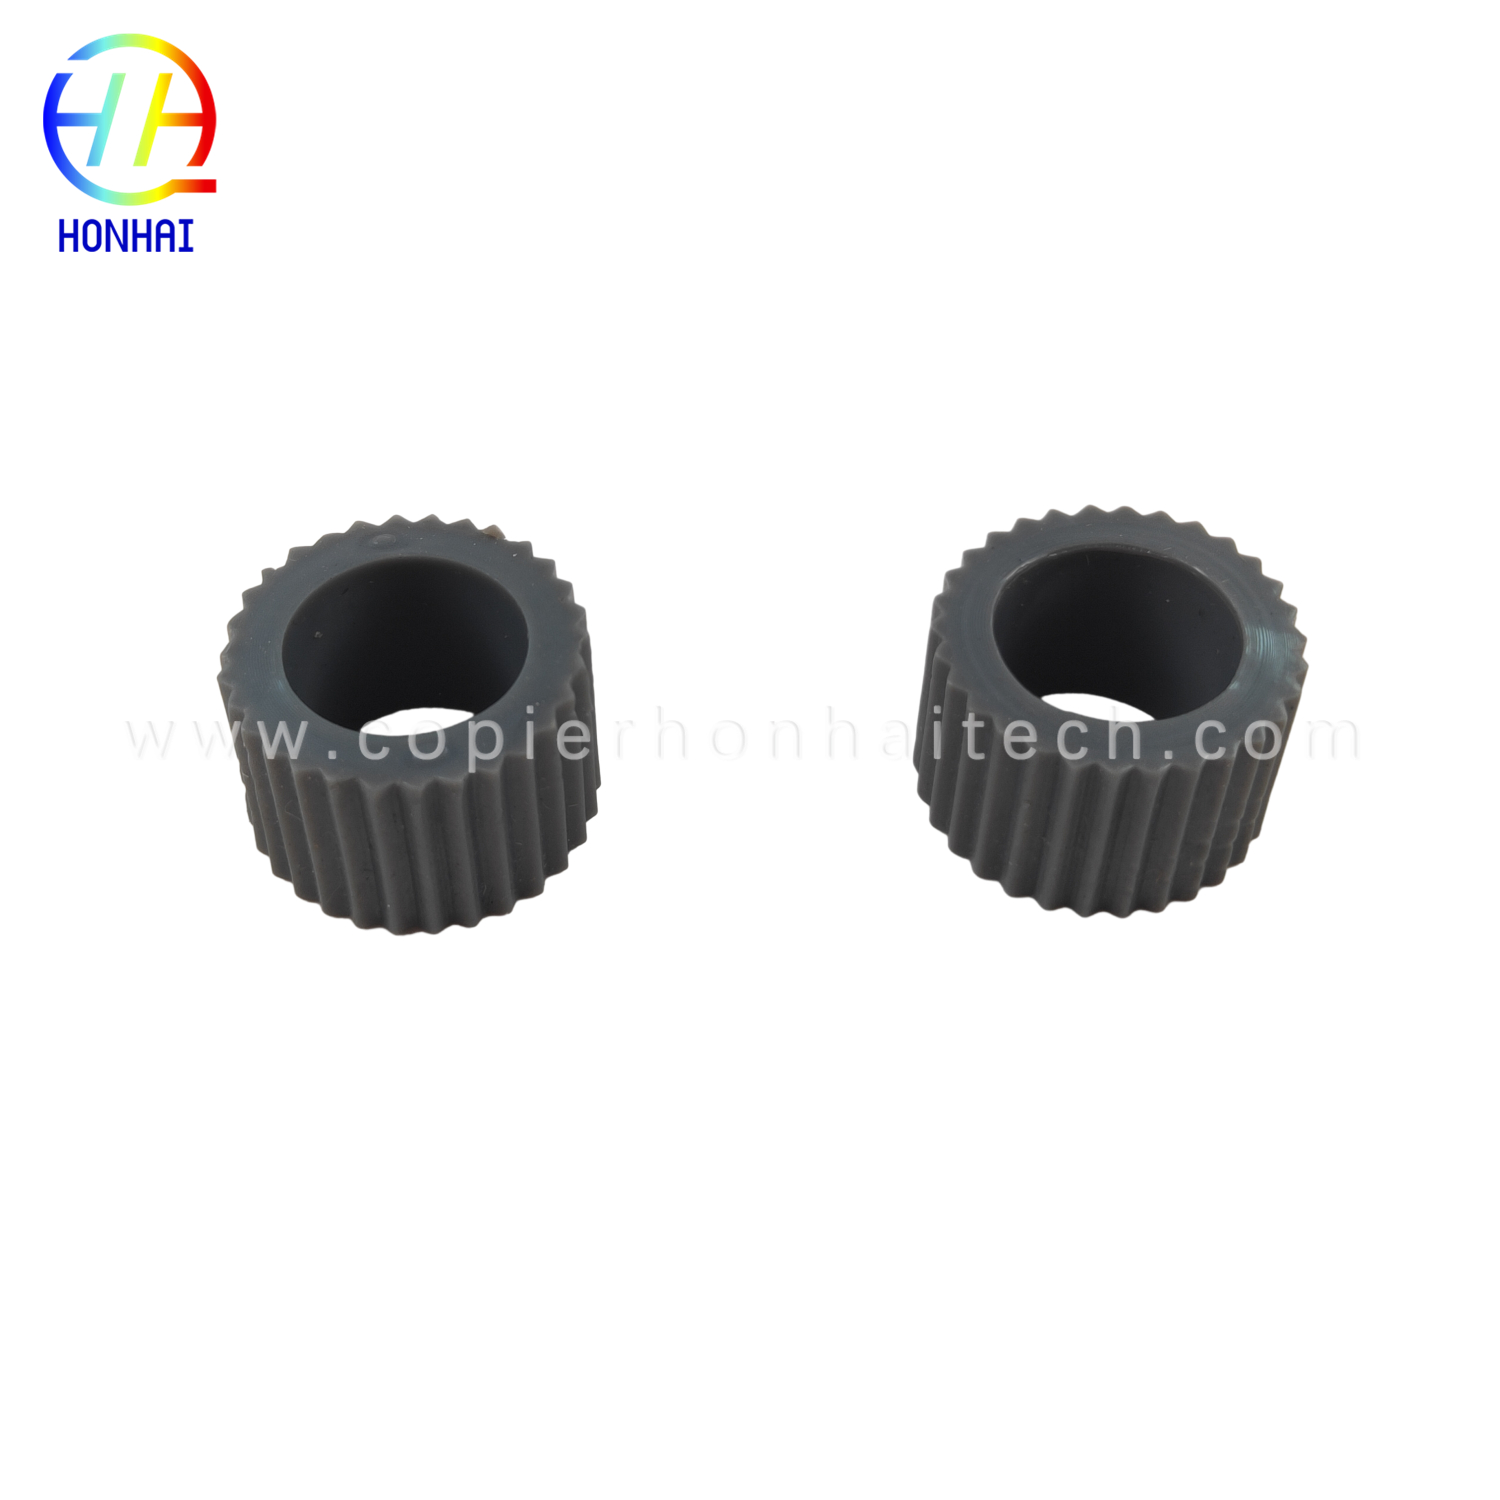 Paper Feed Roller Tire for Canon IR 5055 5065 5075 5050 7086 7095 7105 105 9070